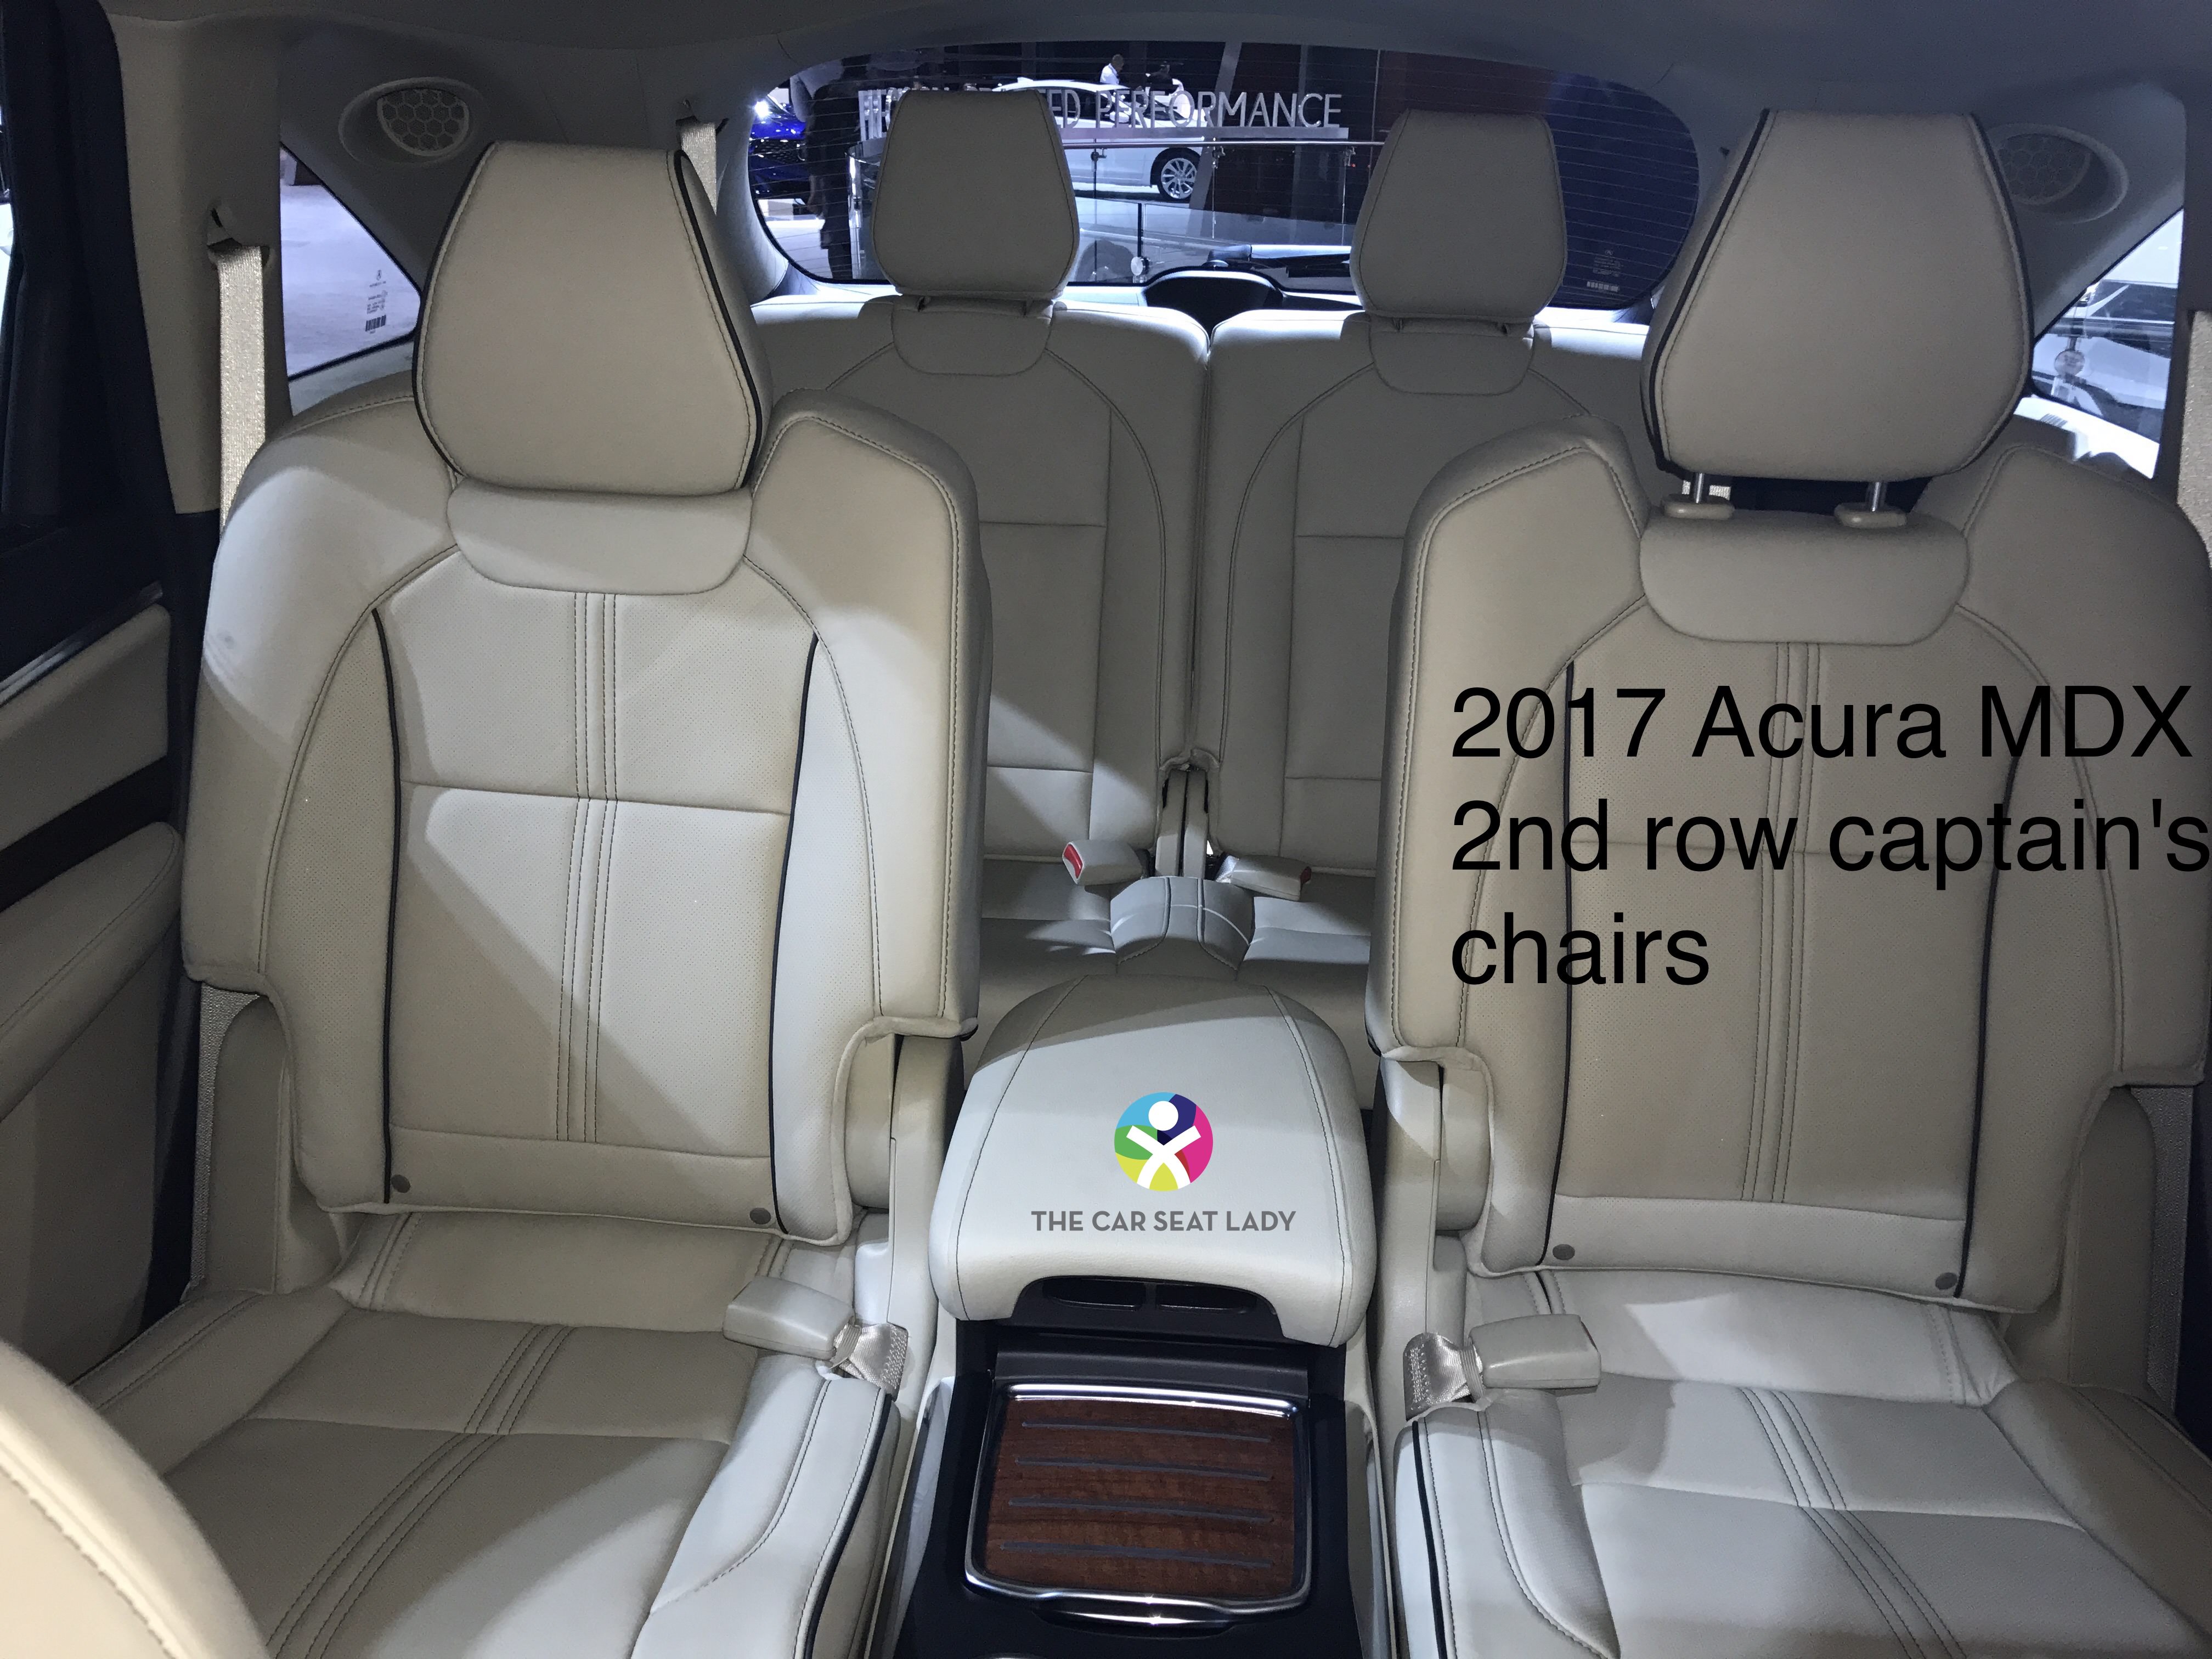 The Car Seat Lady – Acura MDX